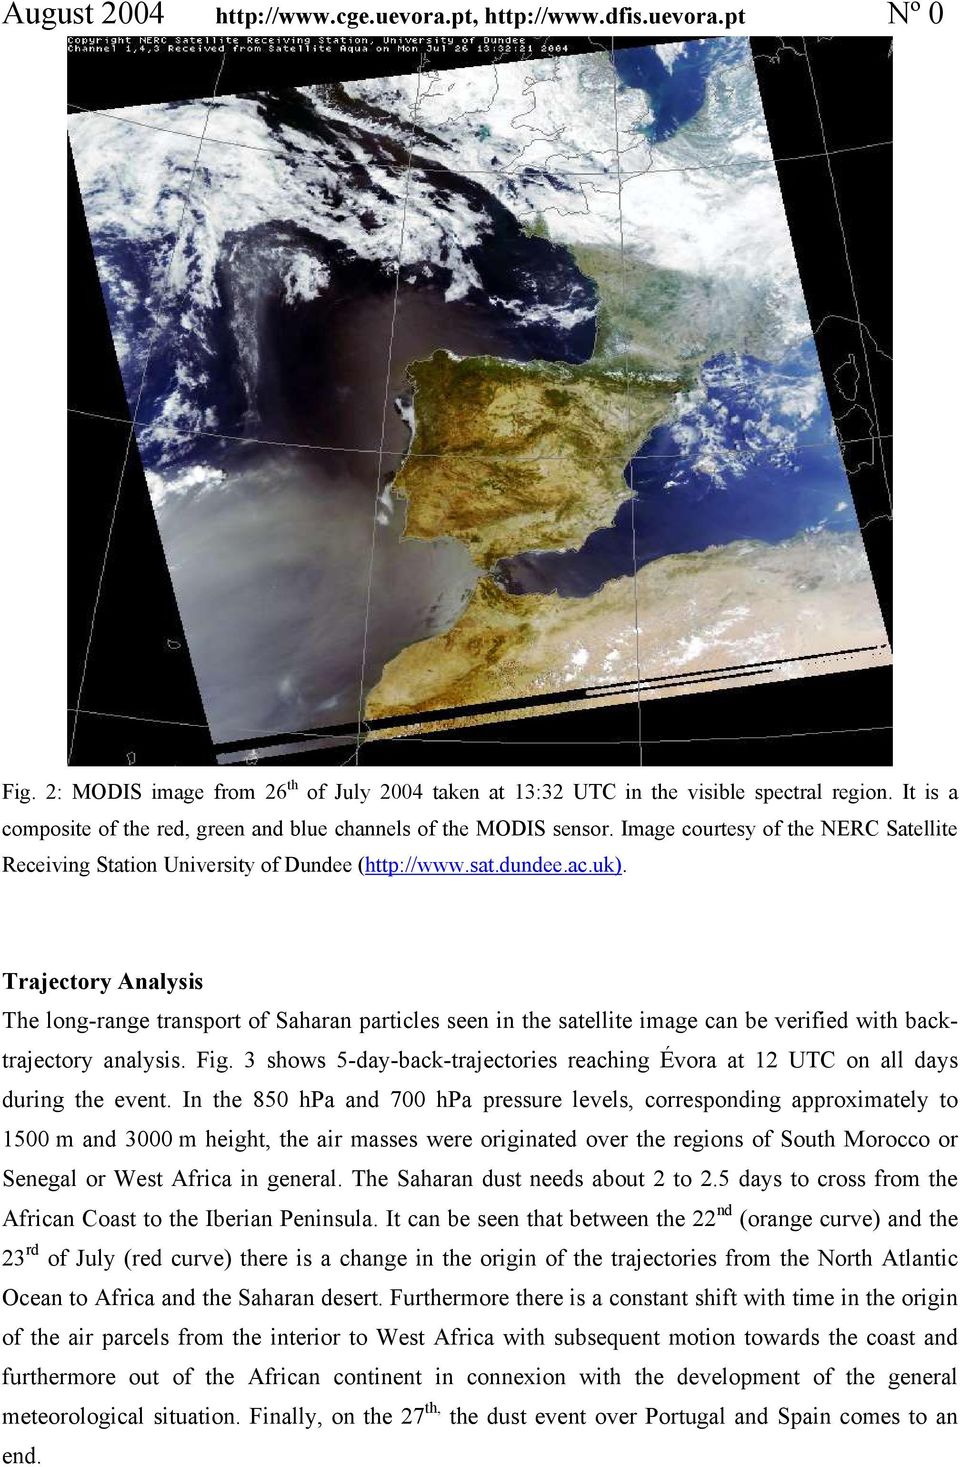 Trajectory Analysis The long-range transport of Saharan particles seen in the satellite image can be verified with backtrajectory analysis. Fig.